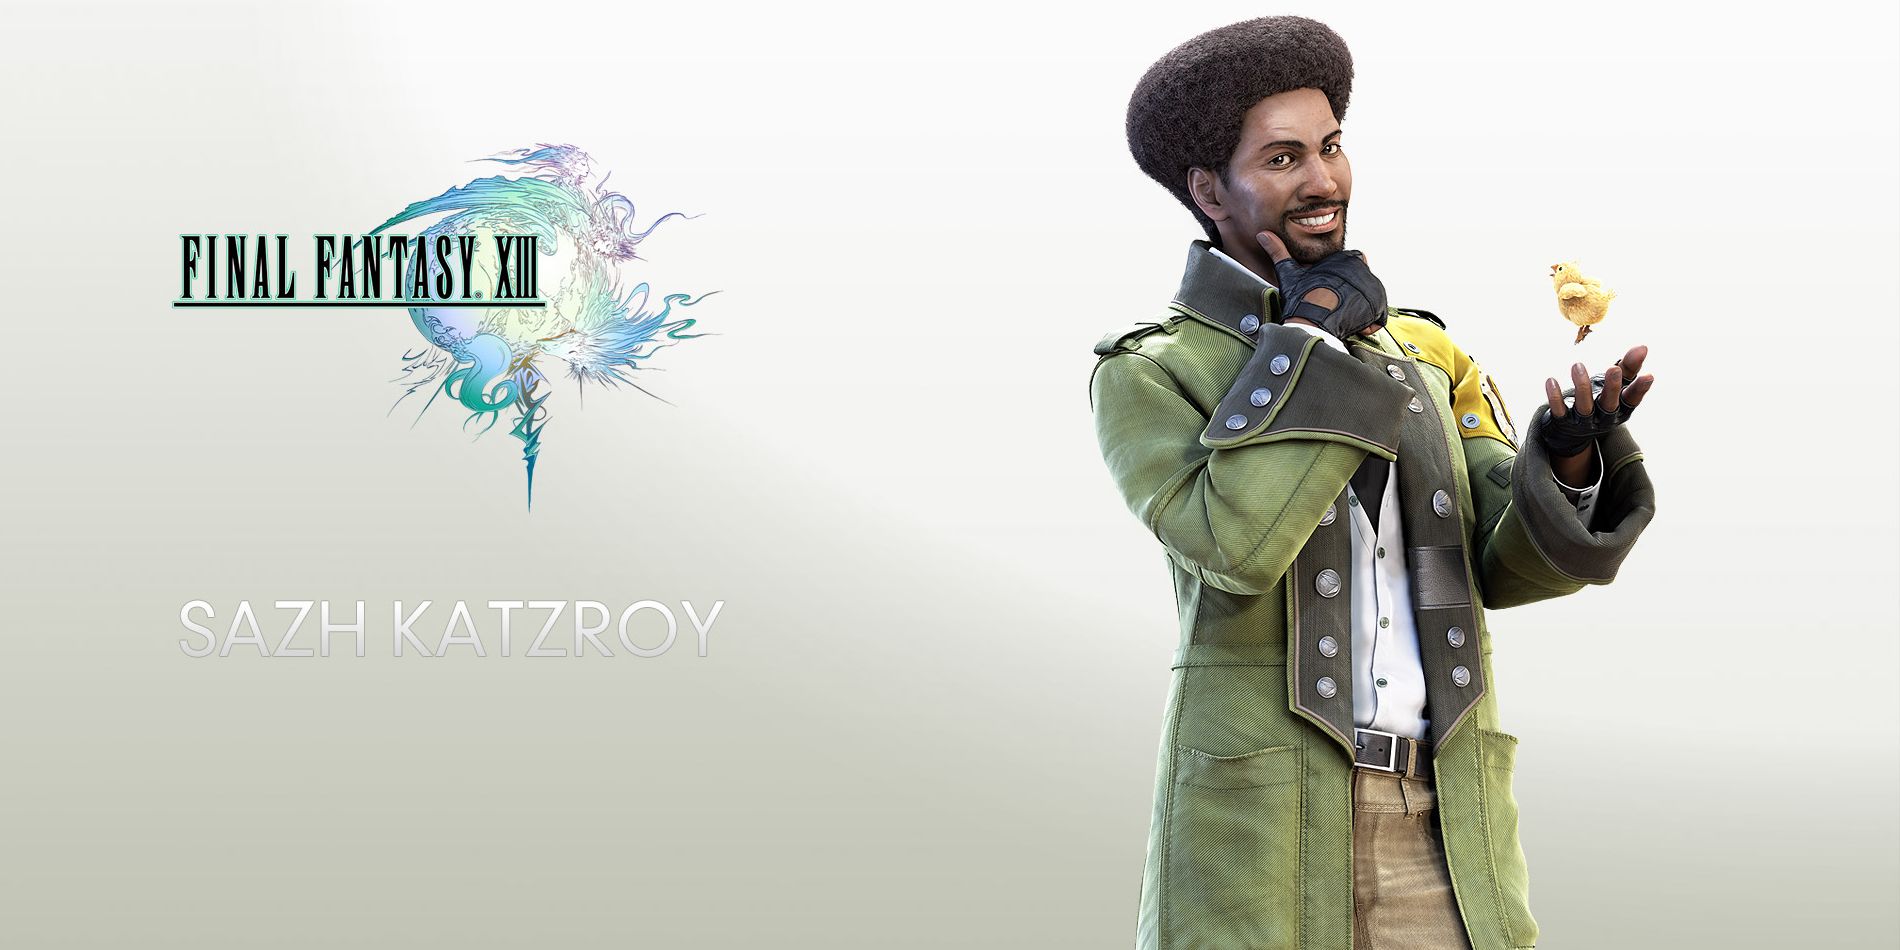 Sazh Final Fantasy XIII wallpaper image. Sazh is on right tossing a piece of paper in his hand with a cheeky smile, to his left is the game logo and his name on a gray background